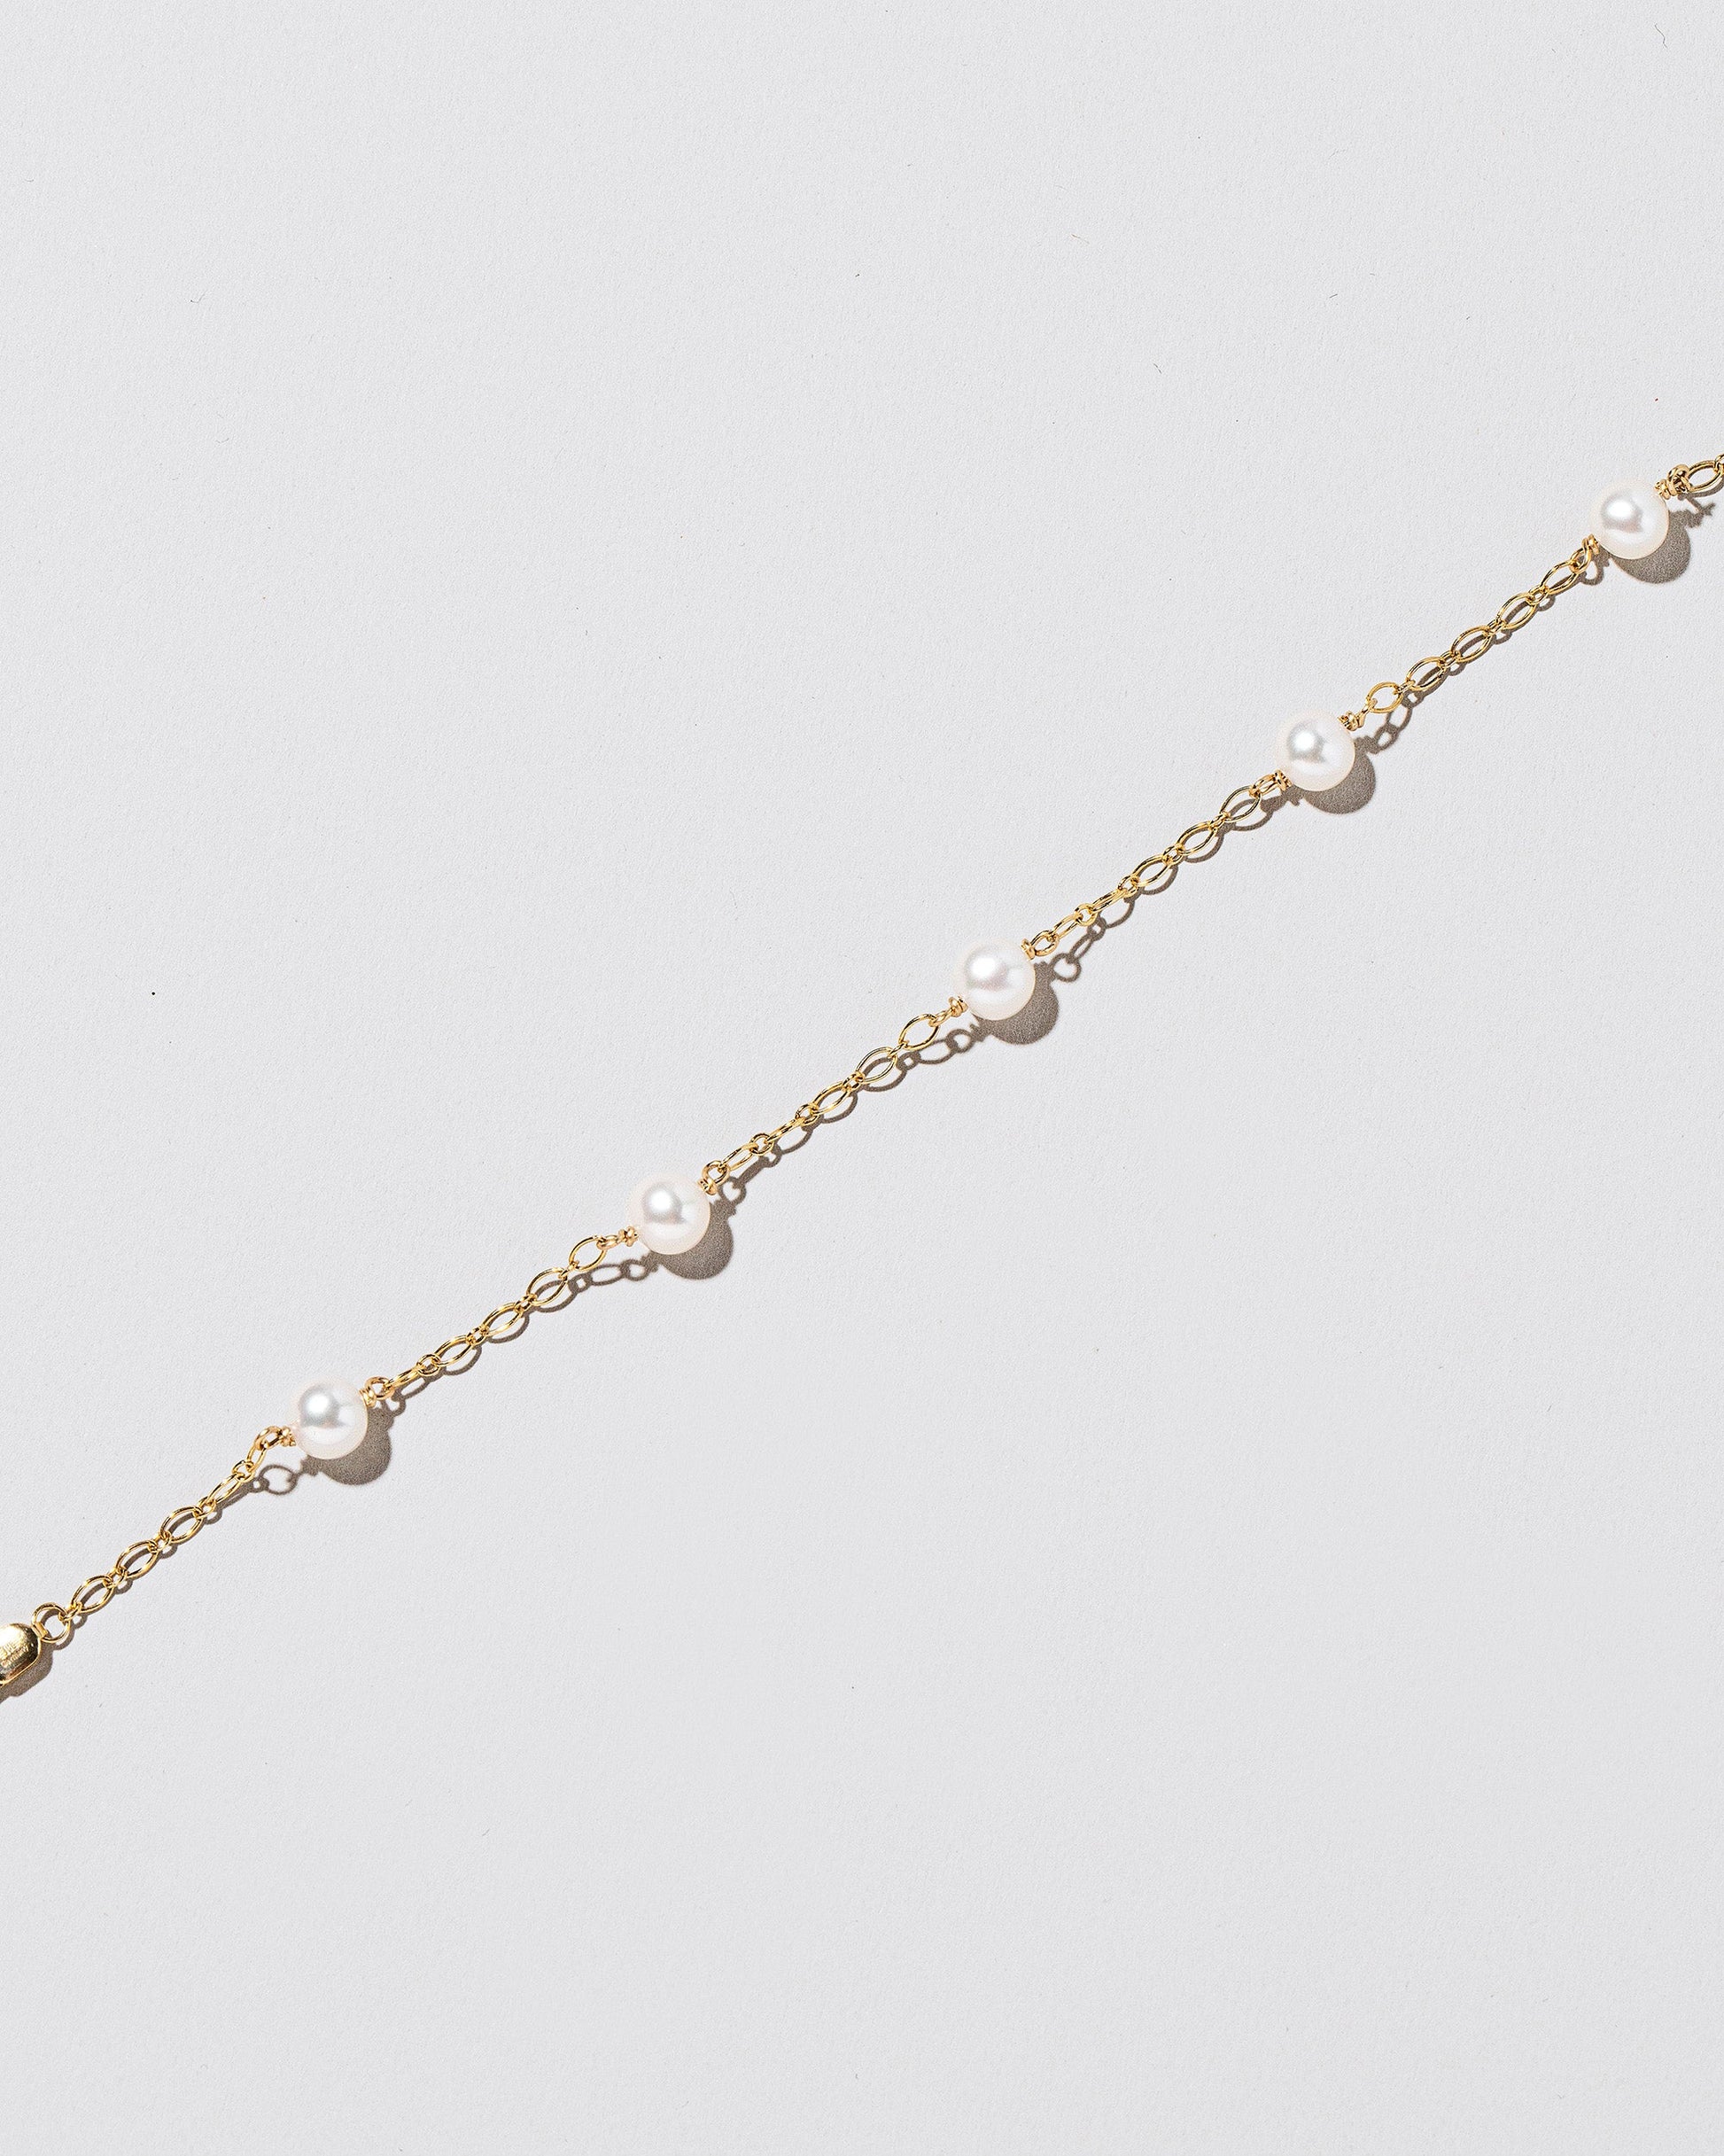 Closeup details of the Five Pearl Station Bracelet Open Oval Chain on light color background.